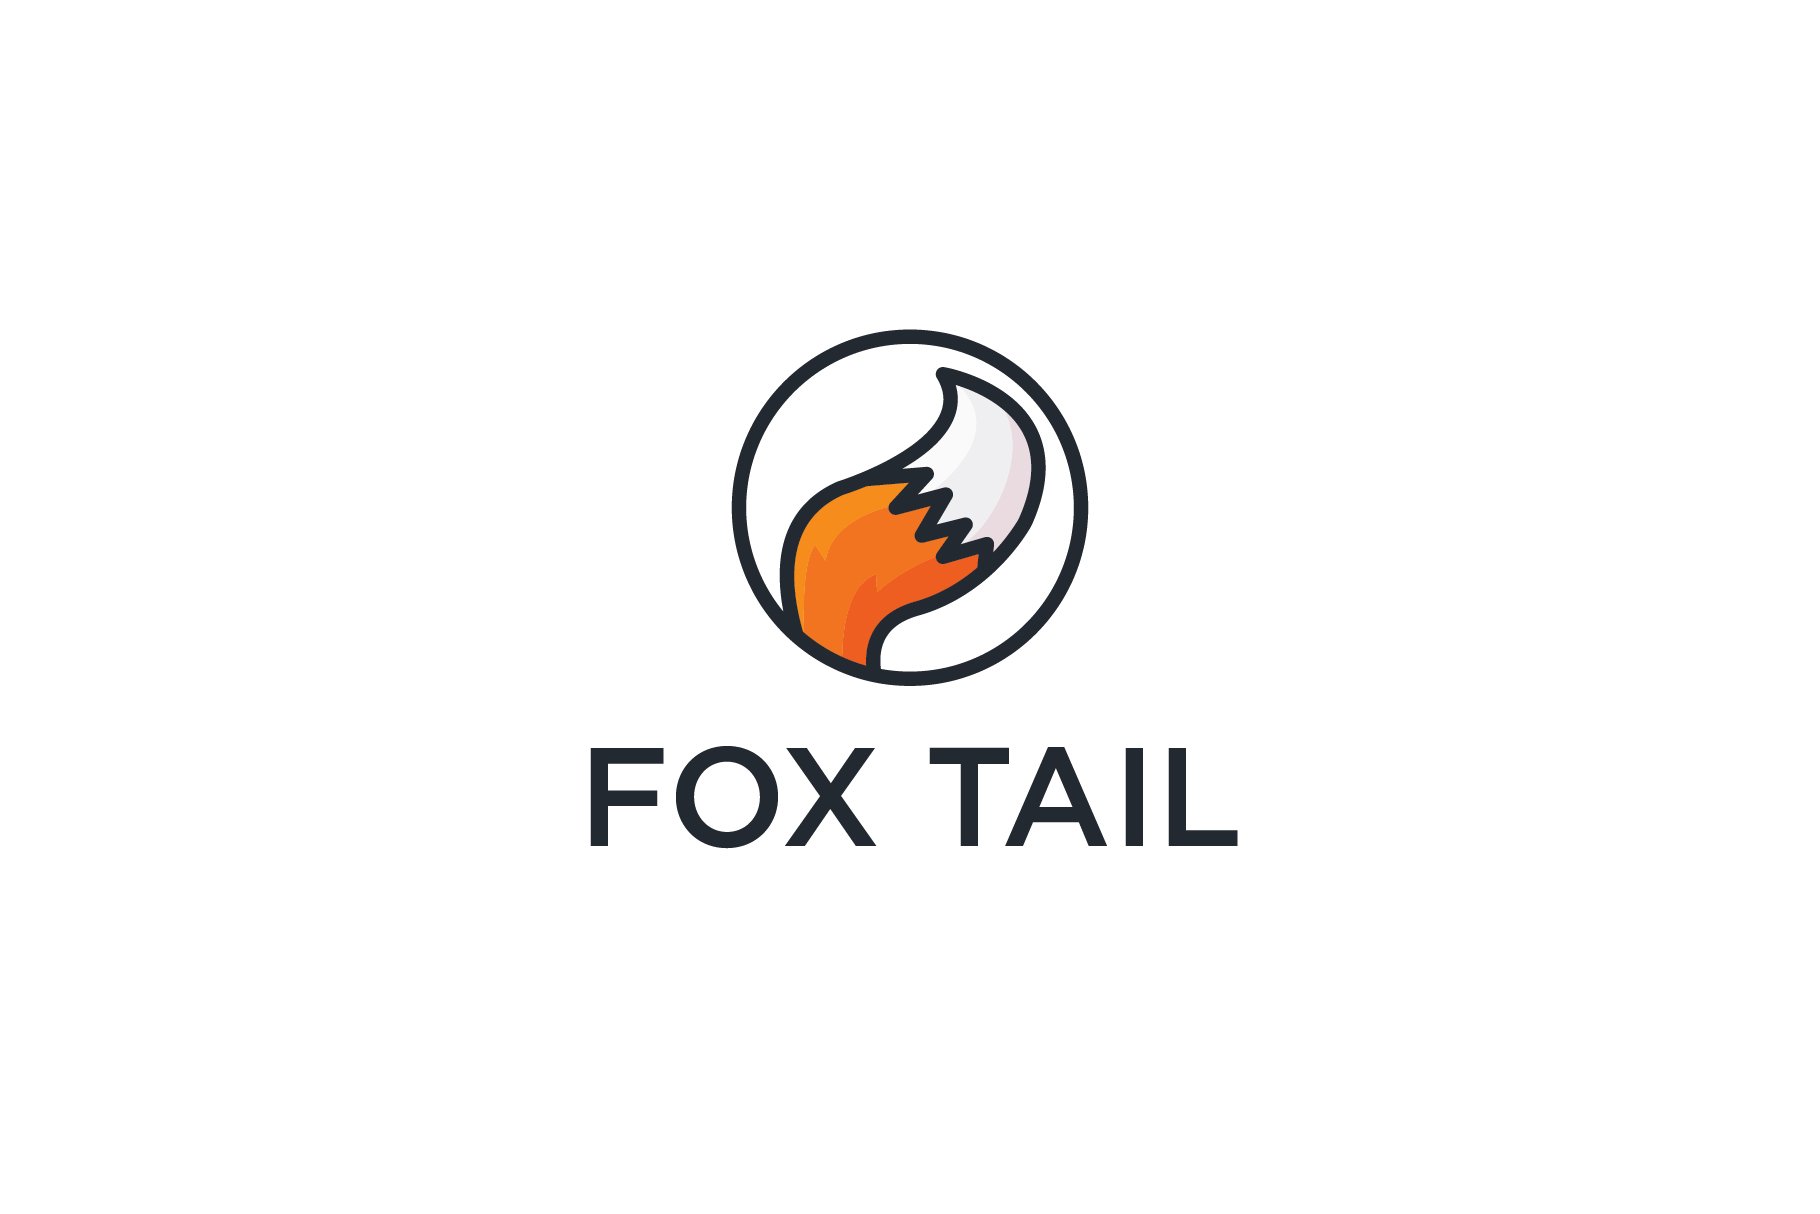 Fox Tail Logo cover image.